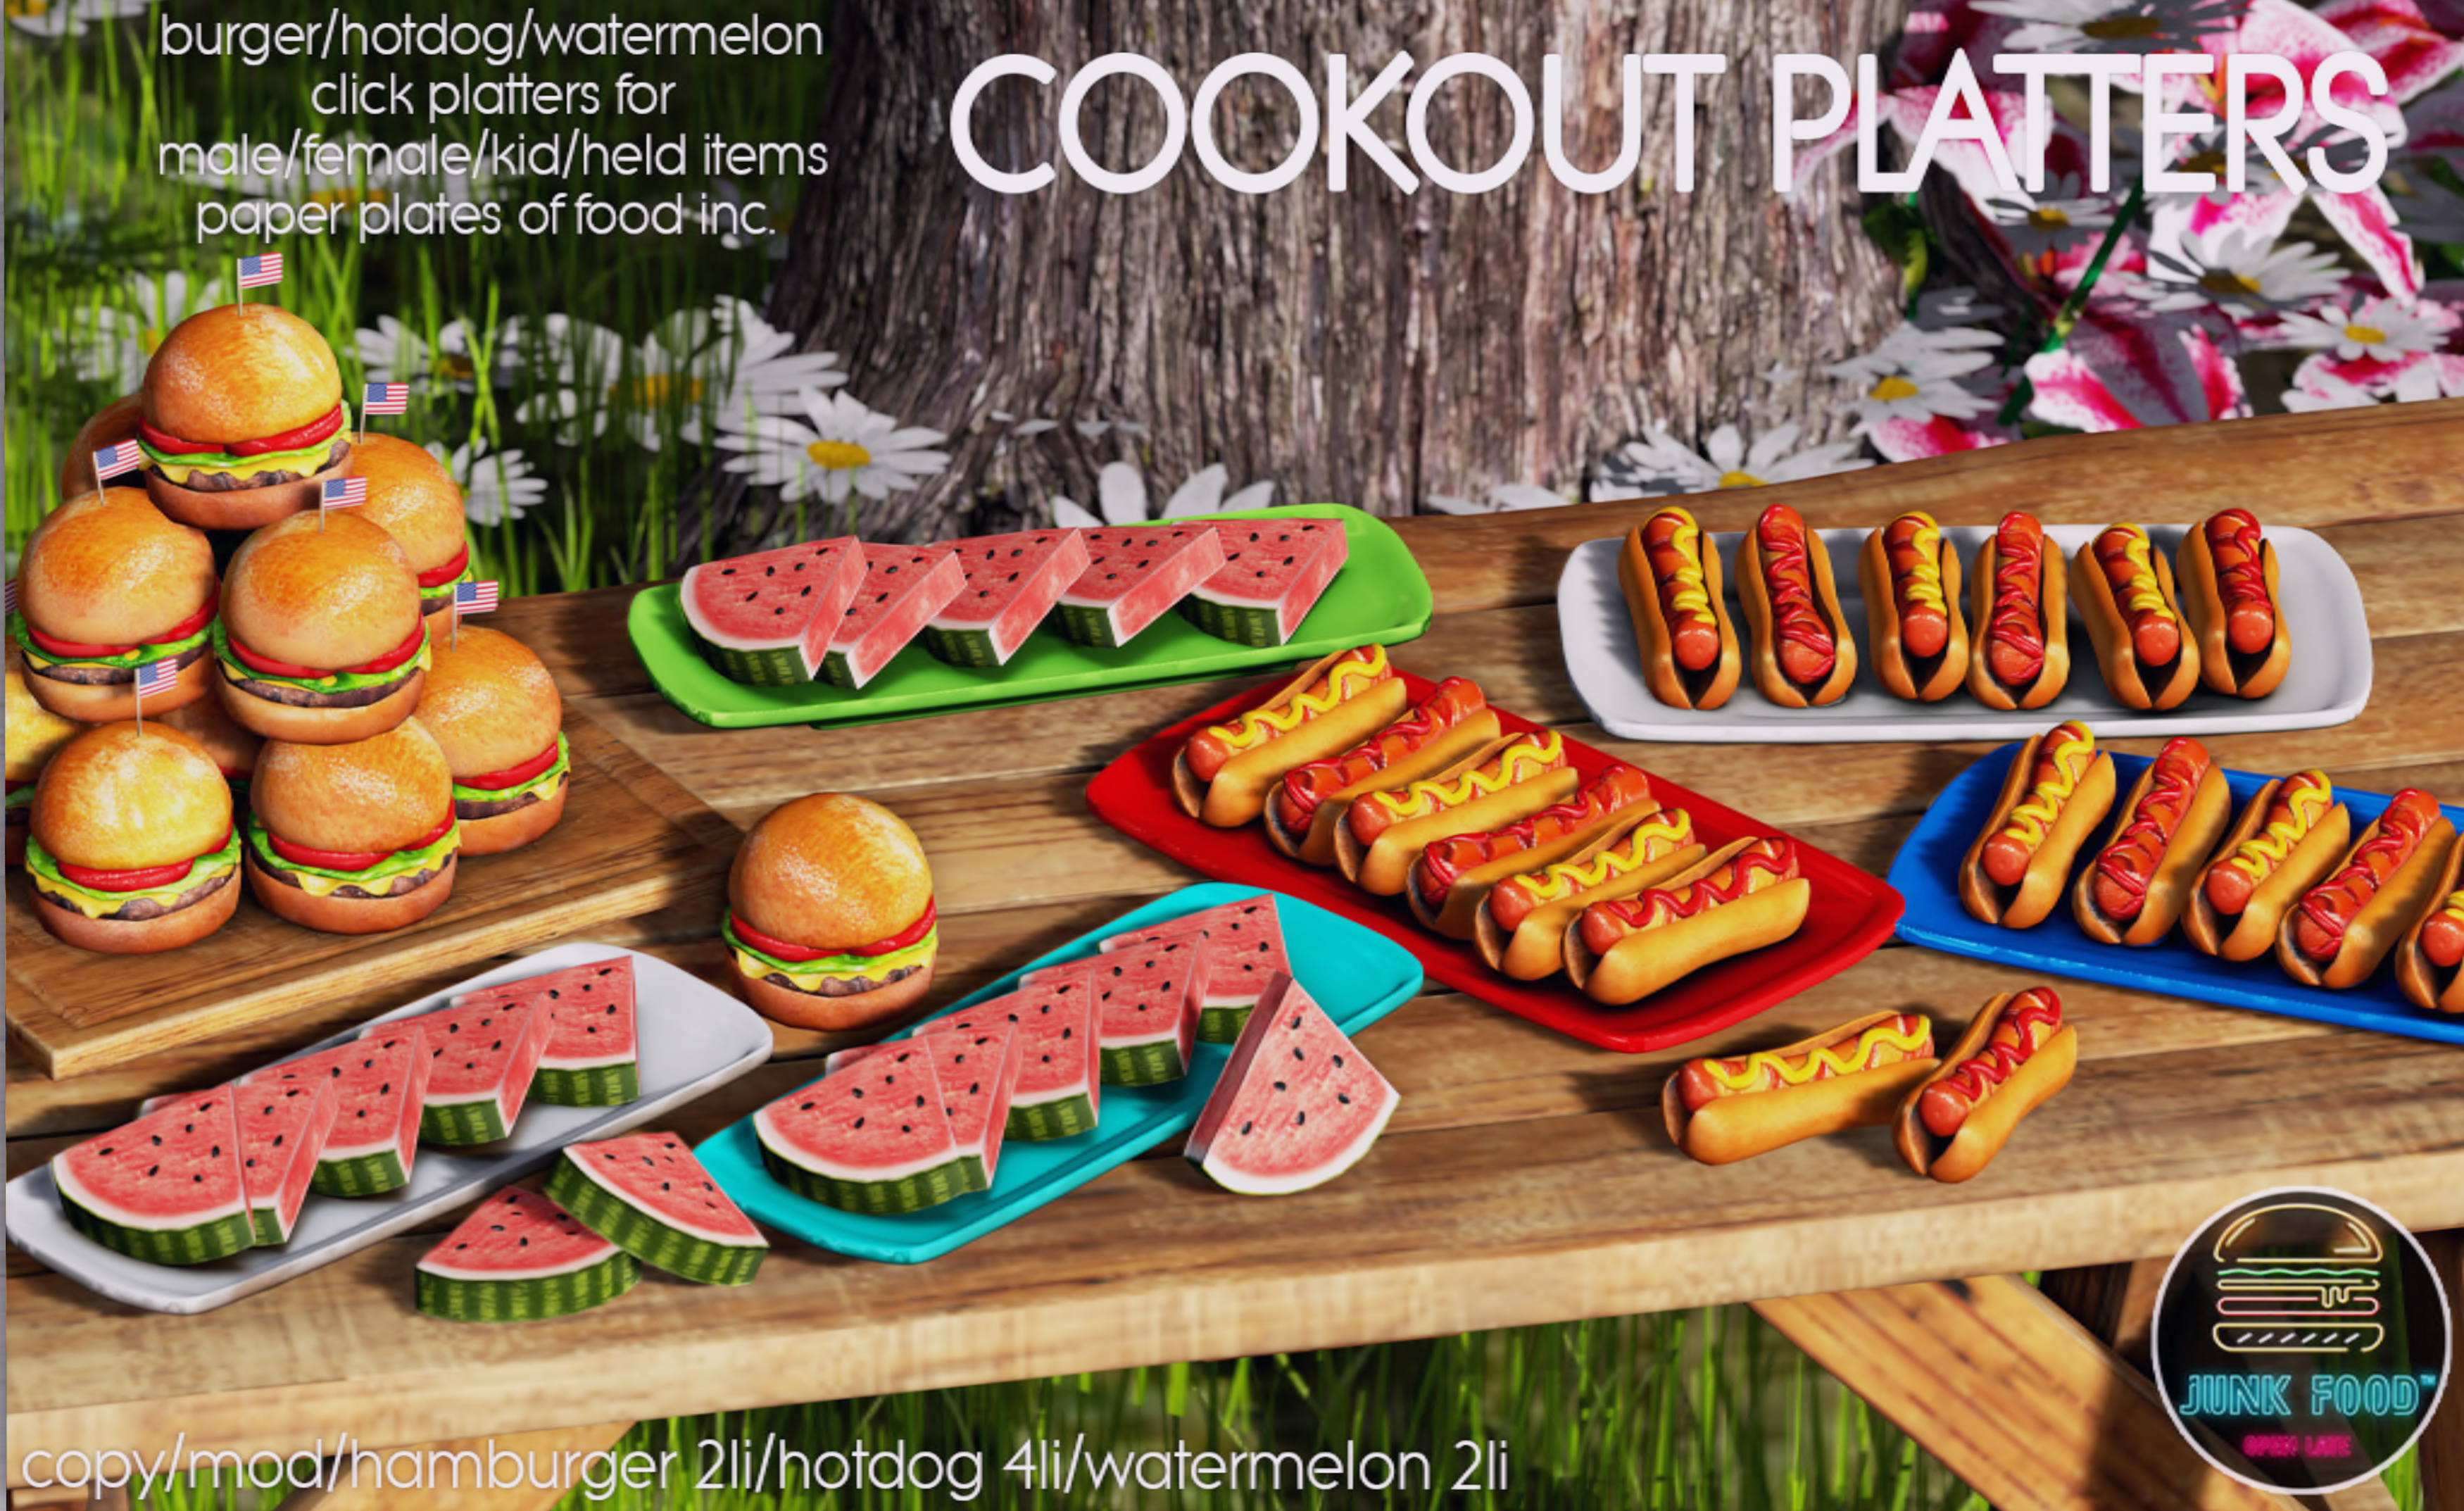 Junkfod – Cookout Platters